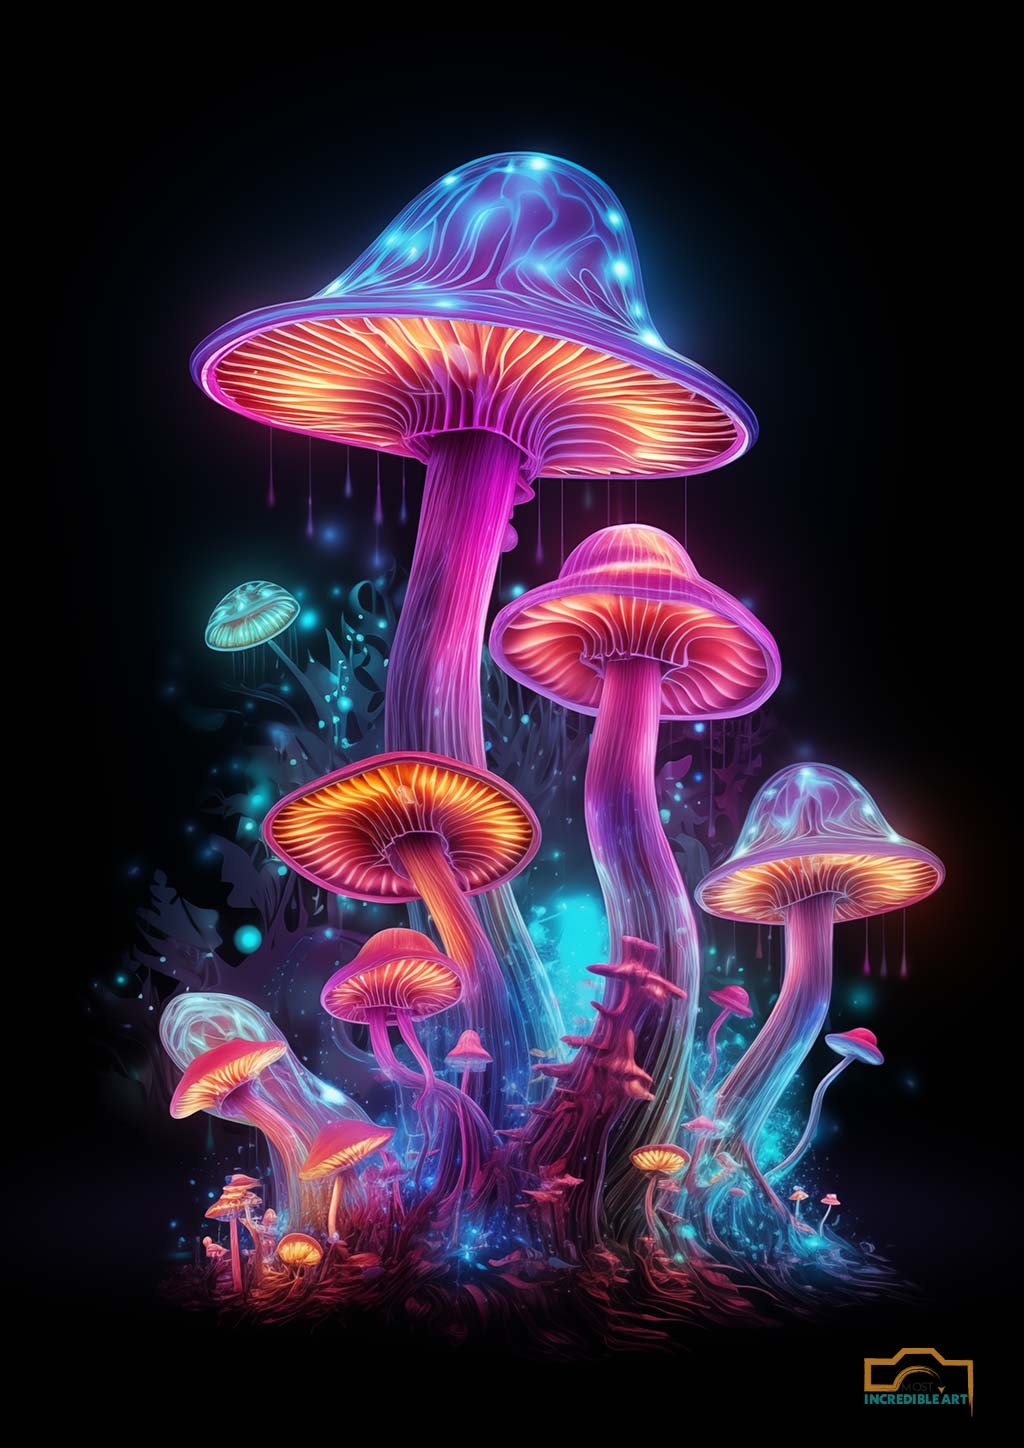 Illuminate Your Space with Captivating Digital Mushroom Neon Art | Set of 4 High-Resolution Downloads